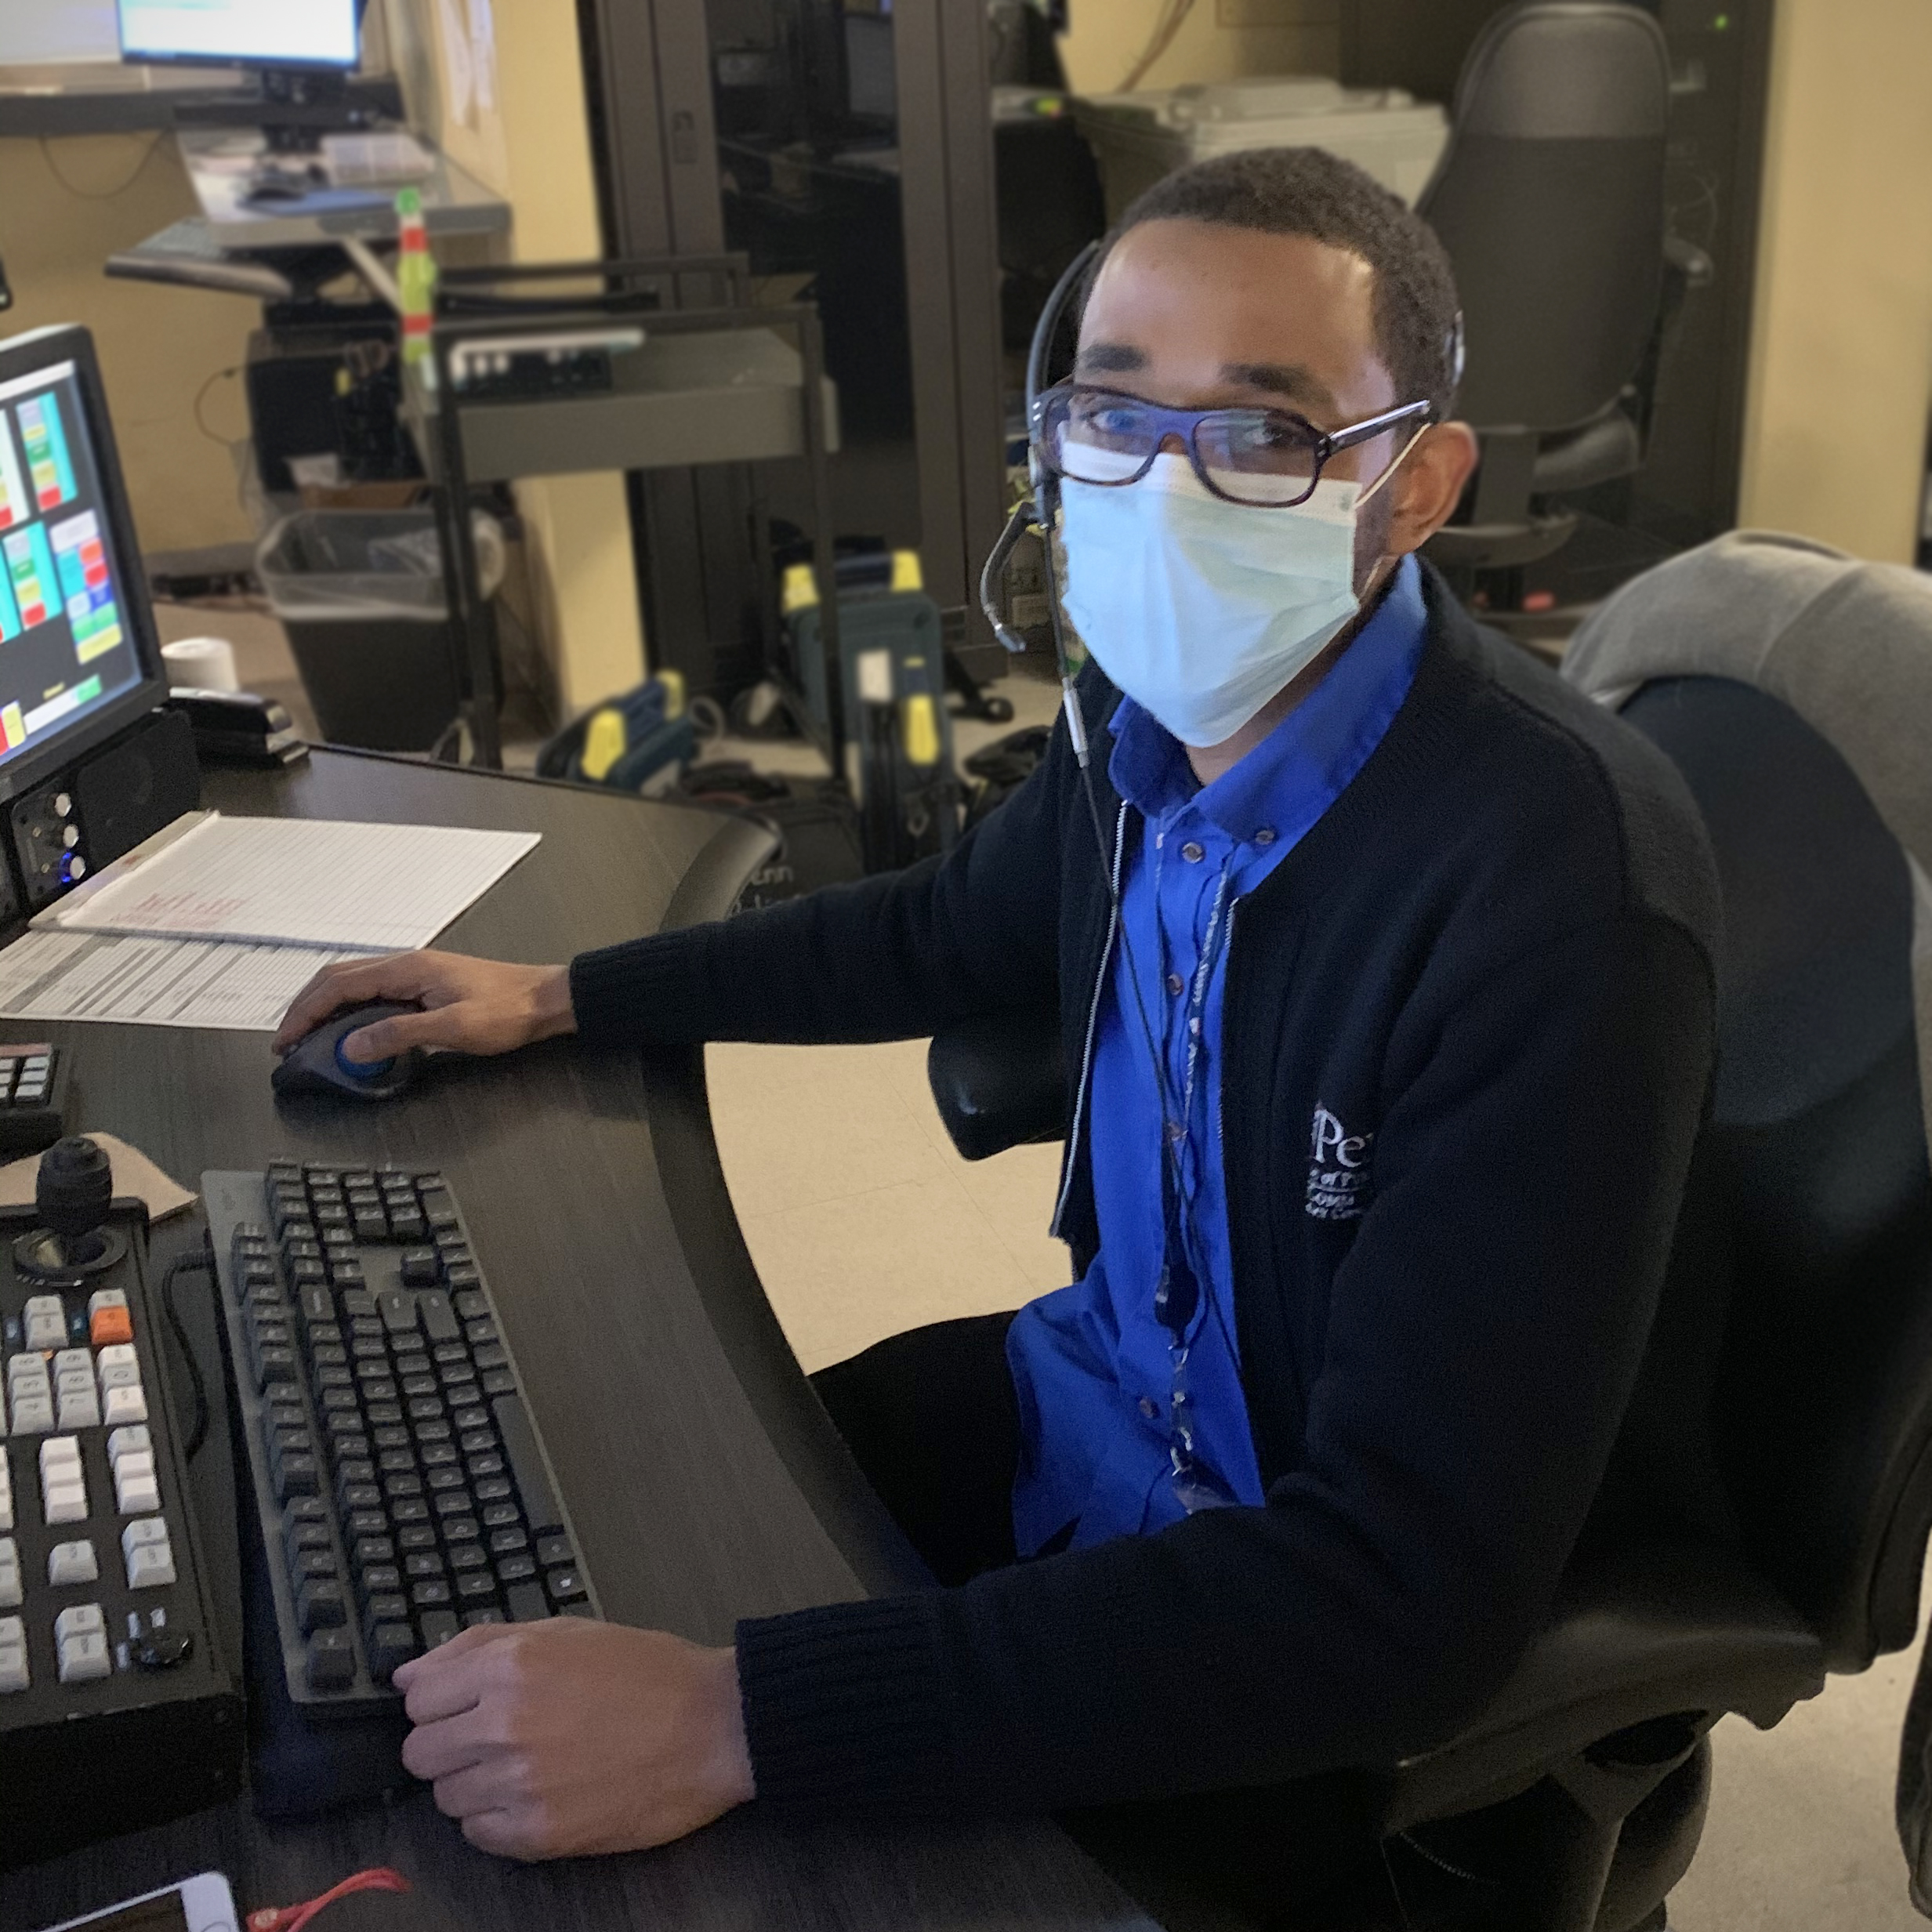 Dispatch photo of Johnathan sitting at desk fielding calls wearing a face covering